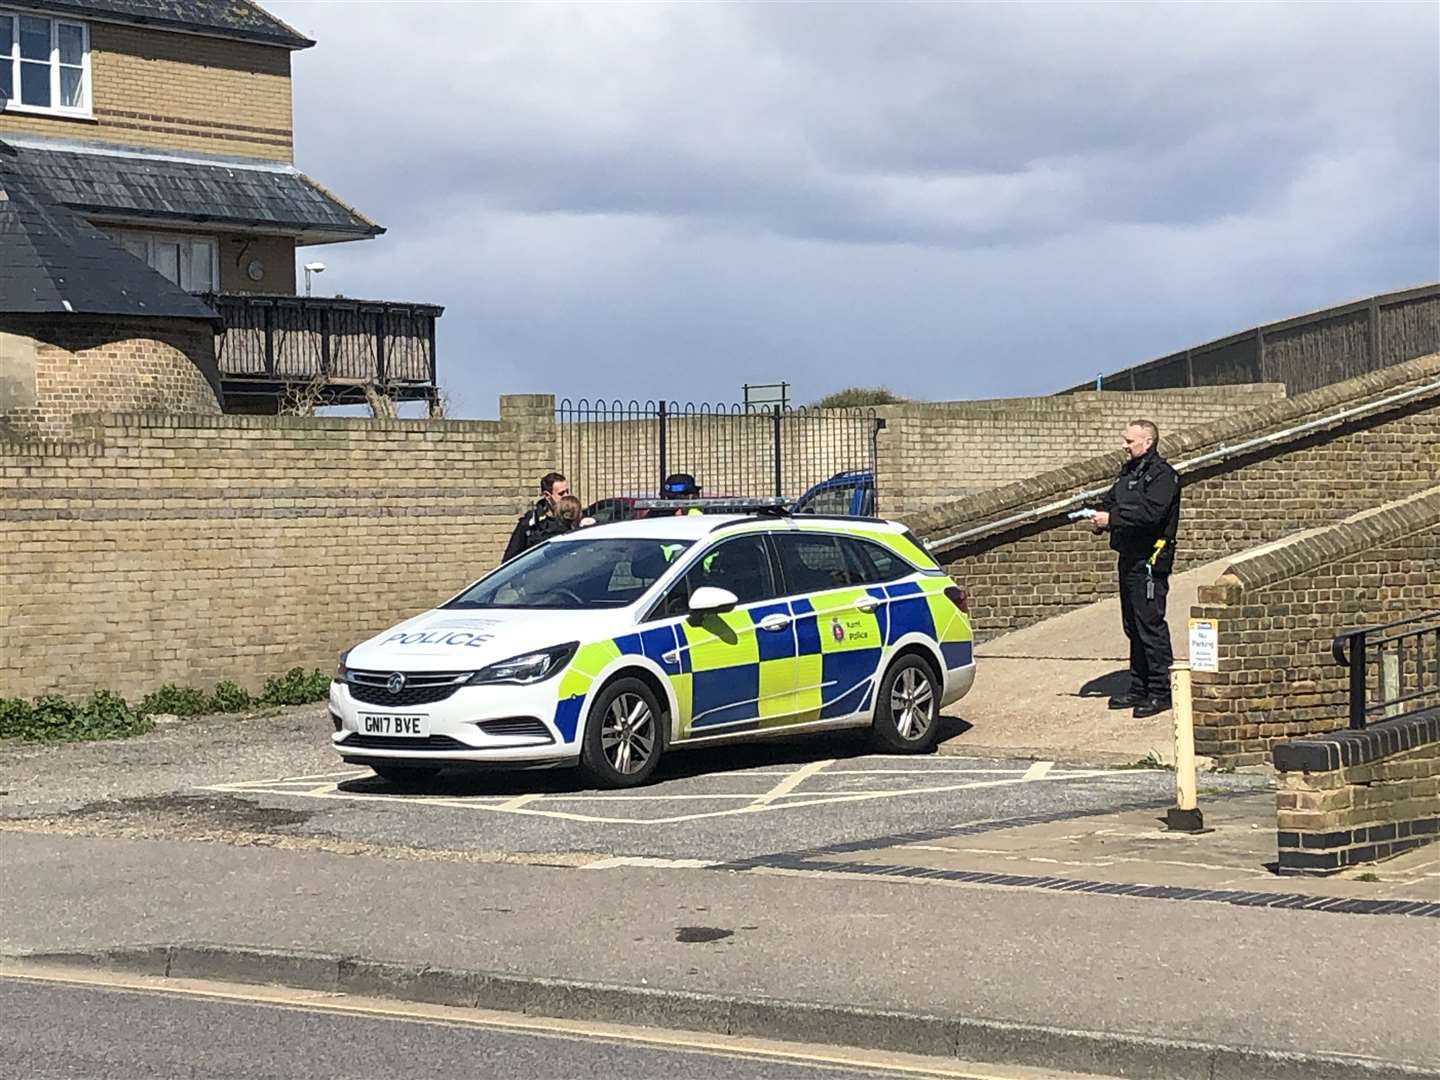 Police in Sheerness Broadway, where a cordon had been put up on the ramp to the beach, this morning